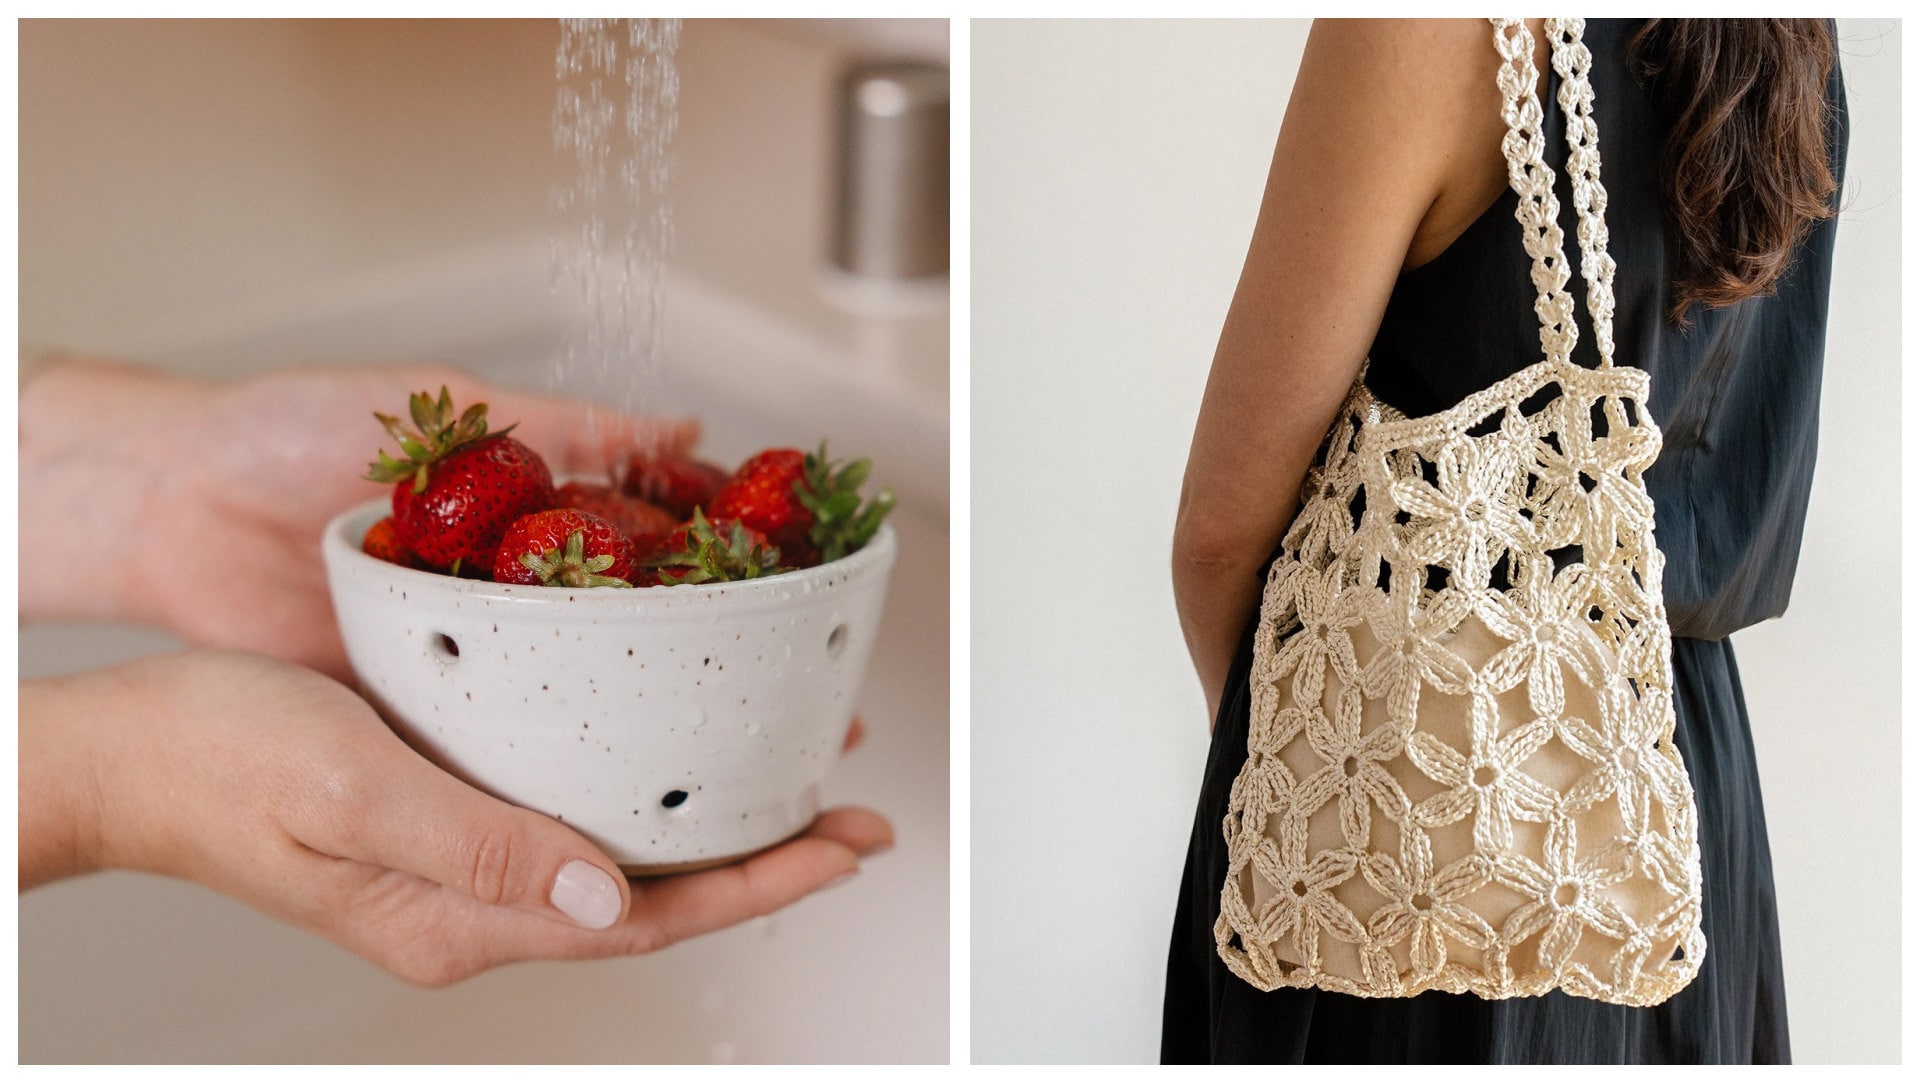 A ceramic bowl and crocheted white shoulder bag with flowers